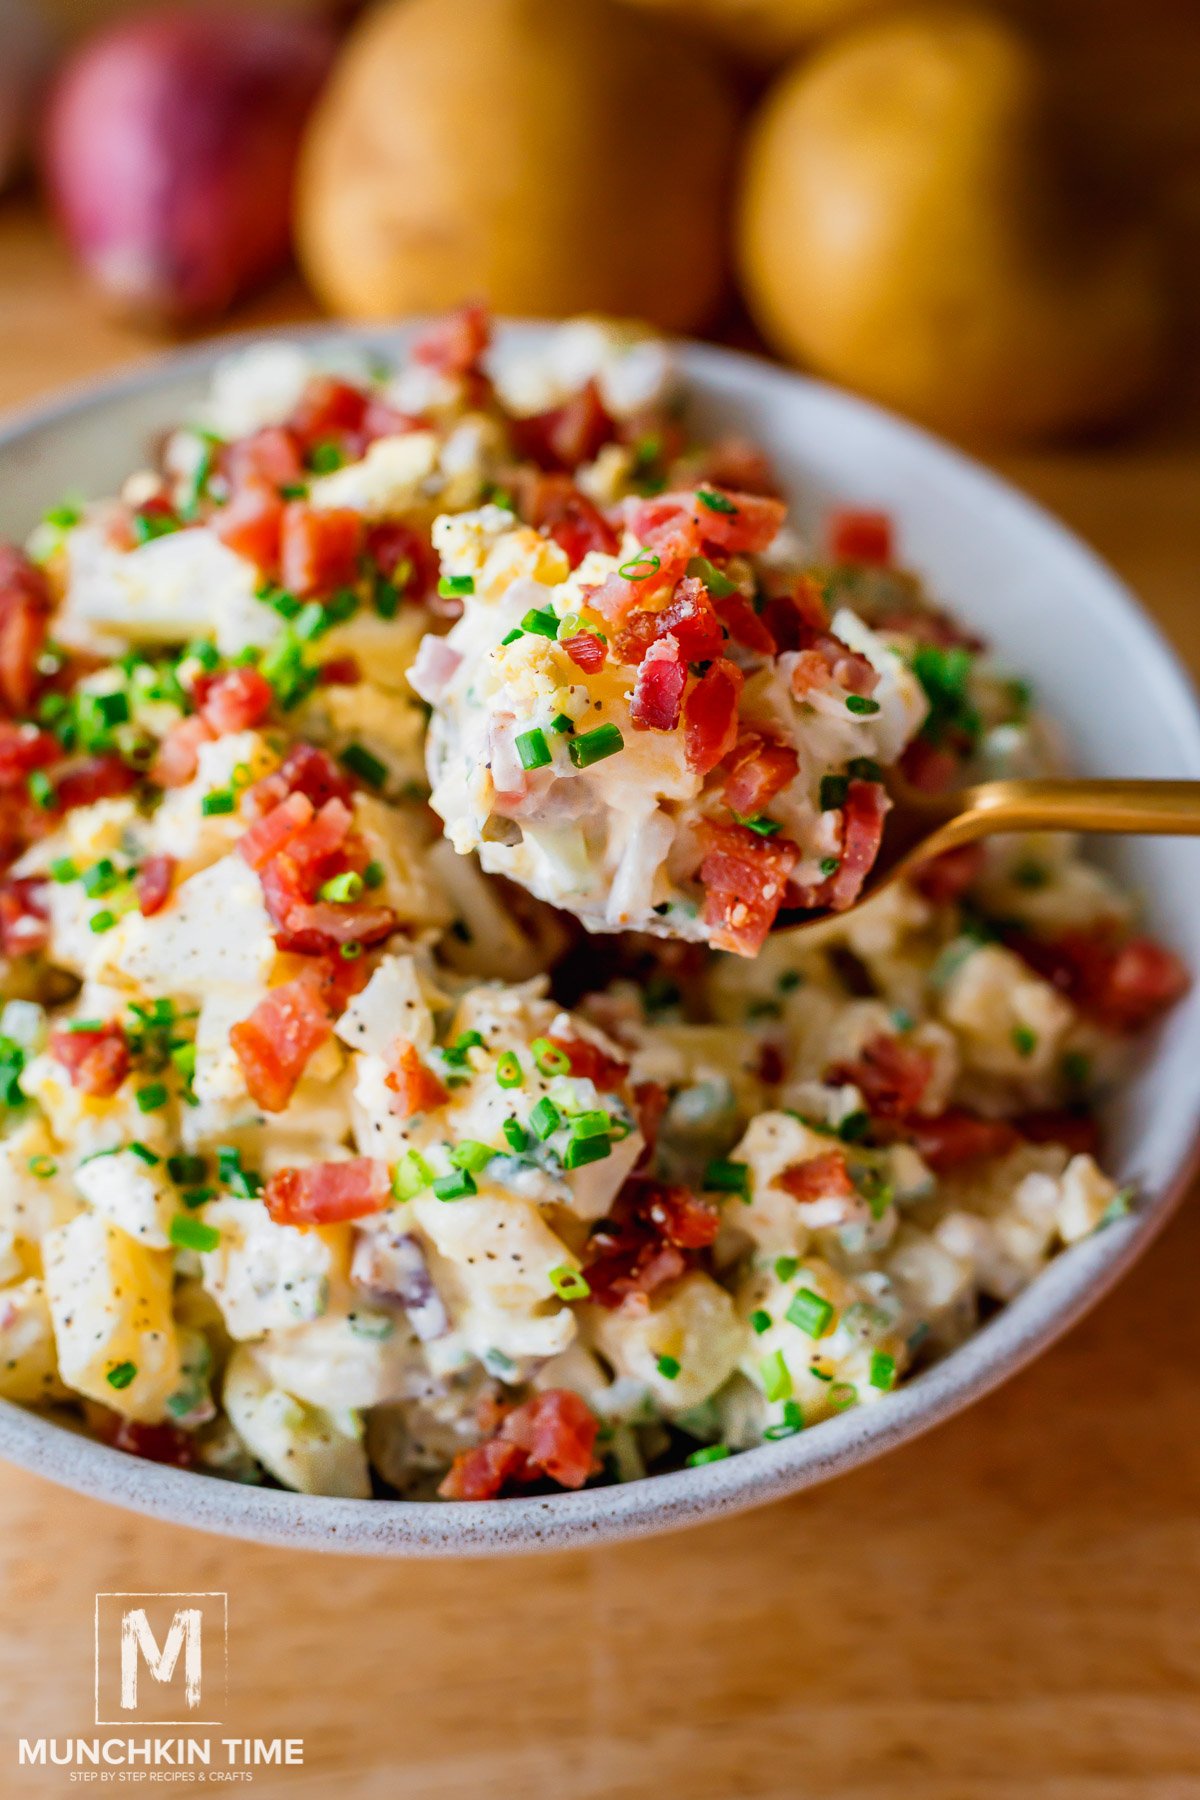 A bowl of Creamy Dill Pickle Potato Salad garnished with bacon pieces and chives.